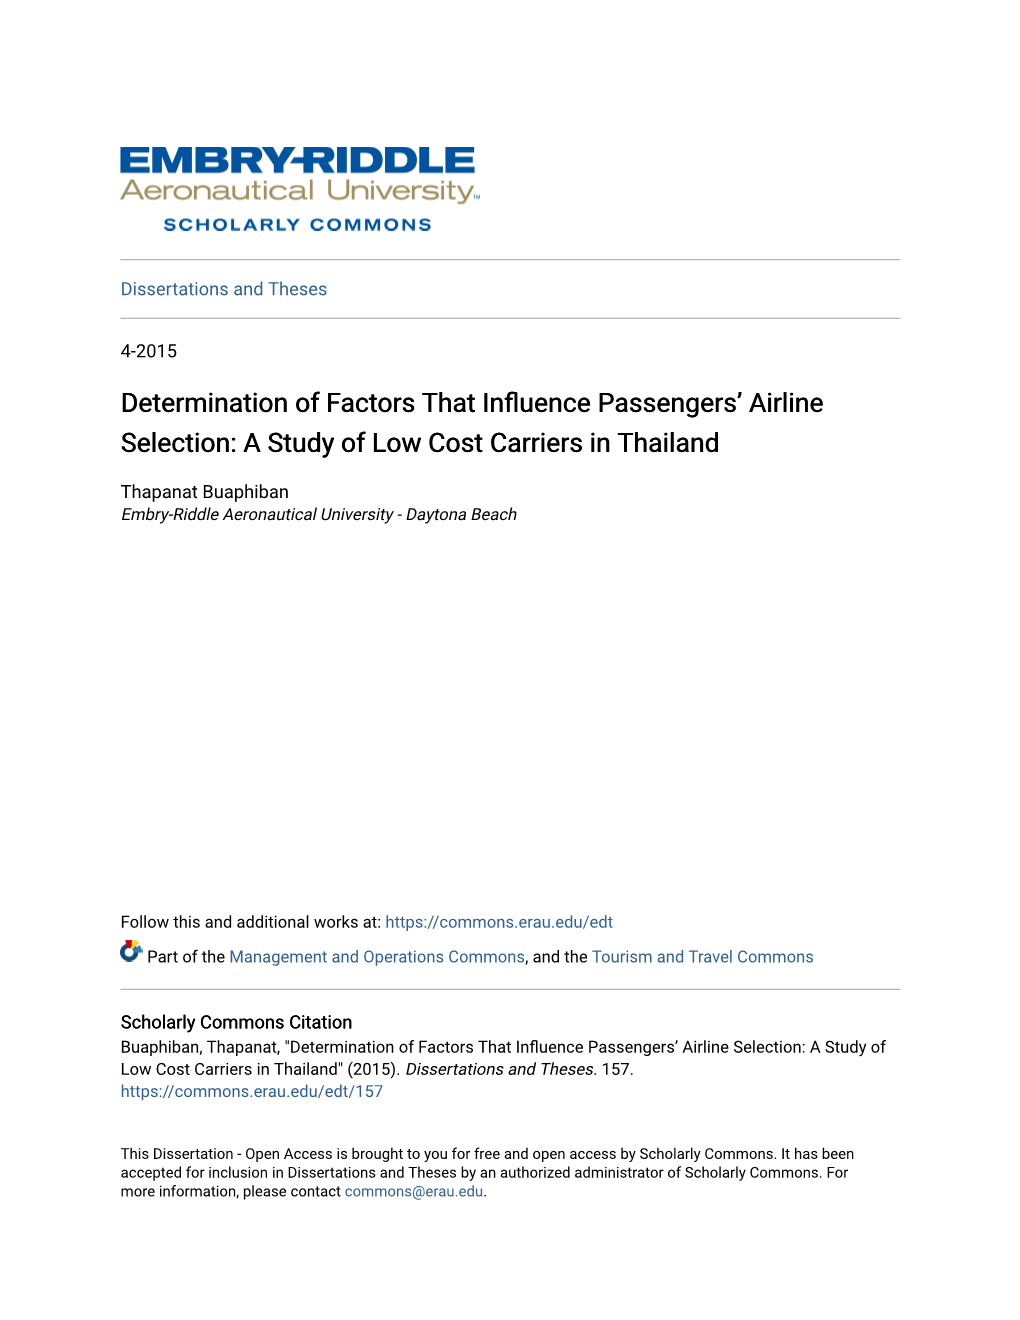 A Study of Low Cost Carriers in Thailand